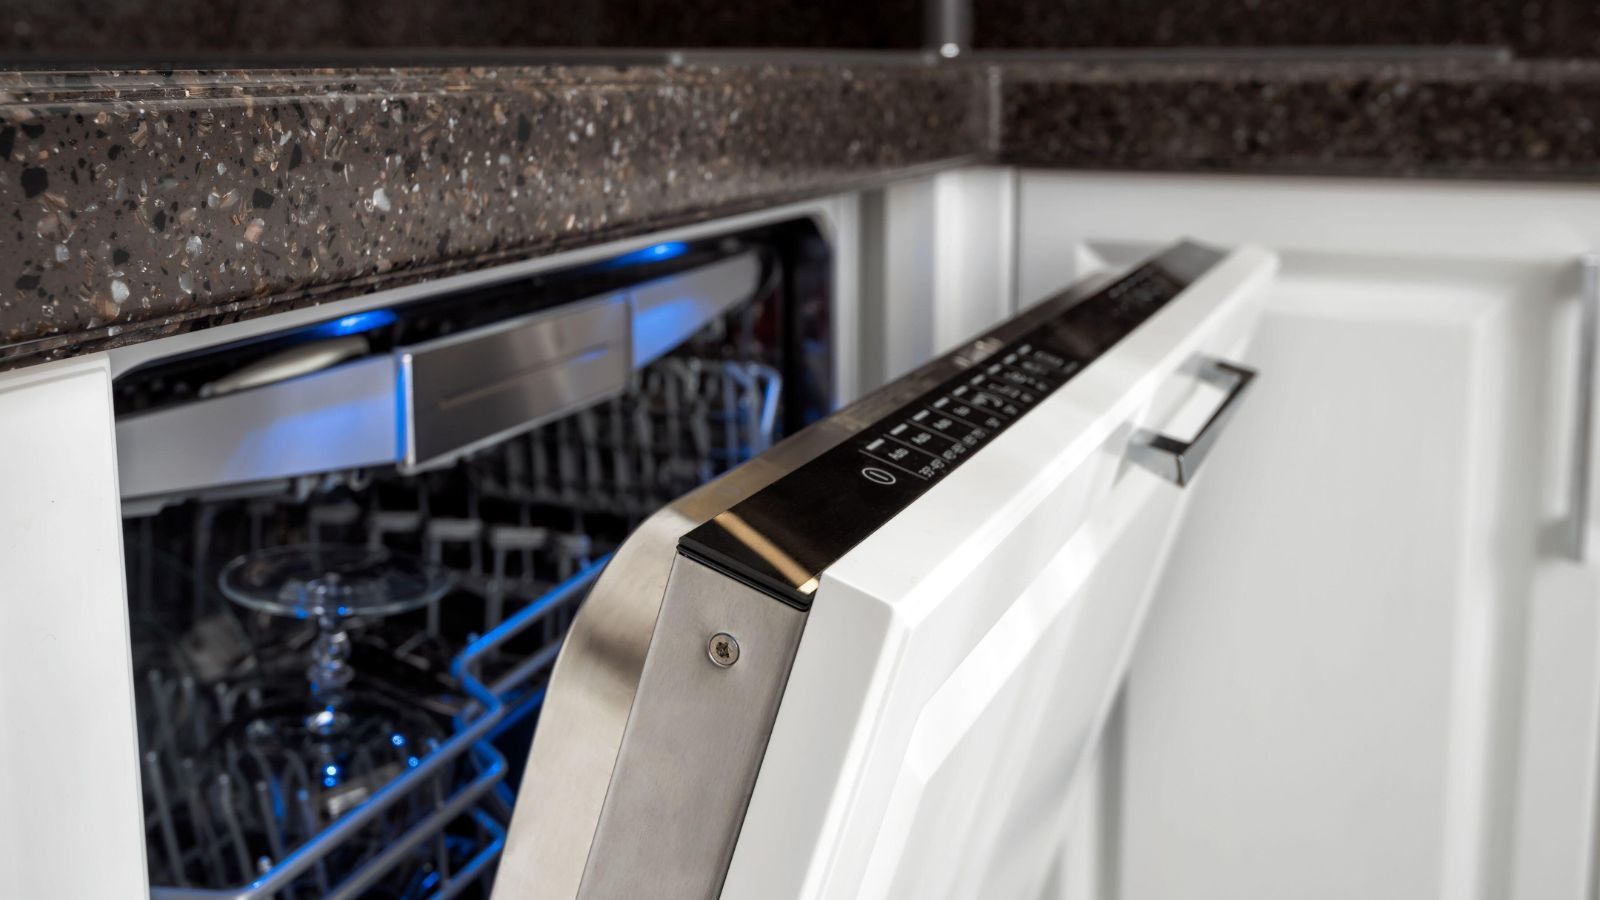 <p>                     Dishwashers are a luxury in a kitchen due to their convenience, but there are some things that are better off left for the sink, experts say.                   </p>                                      <p>                     When choosing kitchen appliances, a dishwasher is often at the top of many of our lists, and knowing what <em>not </em>to put in a dishwasher can make sure this additional appliance continues to serve our homes for years to come. Putting the wrong things in your dishwasher could result in extra work – or even extra costs if your dishes, or your dishwasher itself, ends up broken.                   </p>                                      <p>                     Here, experts share 12 things you should avoid putting in your dishwasher to help prolong its lifespan and keep your kitchenware in top shape too.                   </p>                                      <p>                     <em>BY CHIANA DICKSON</em>                   </p>